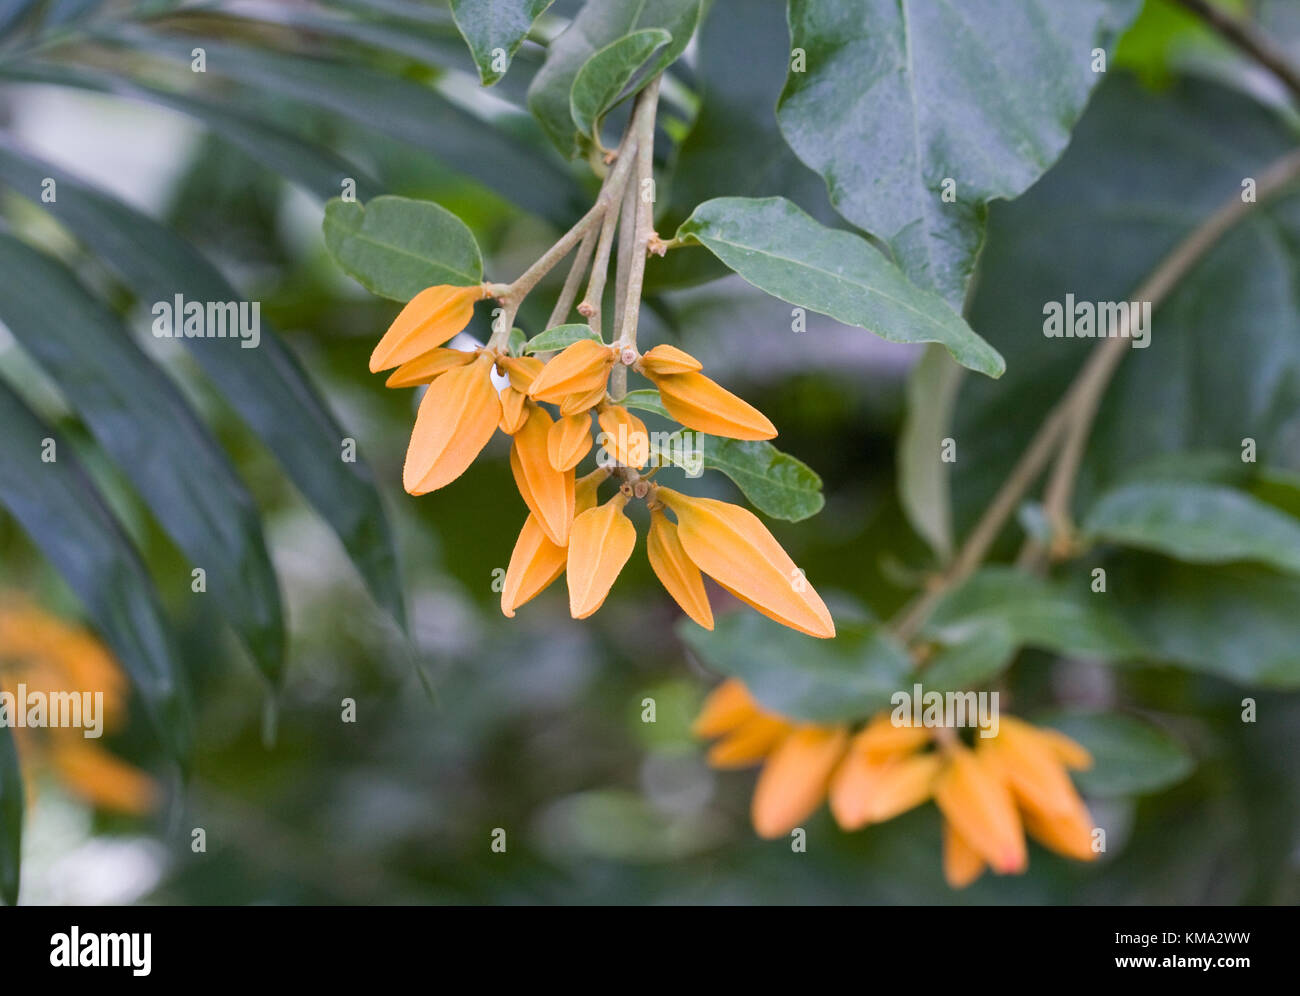 Juanulloa mexicana 'Gold Finger' flowers growing in a protected environment. Stock Photo